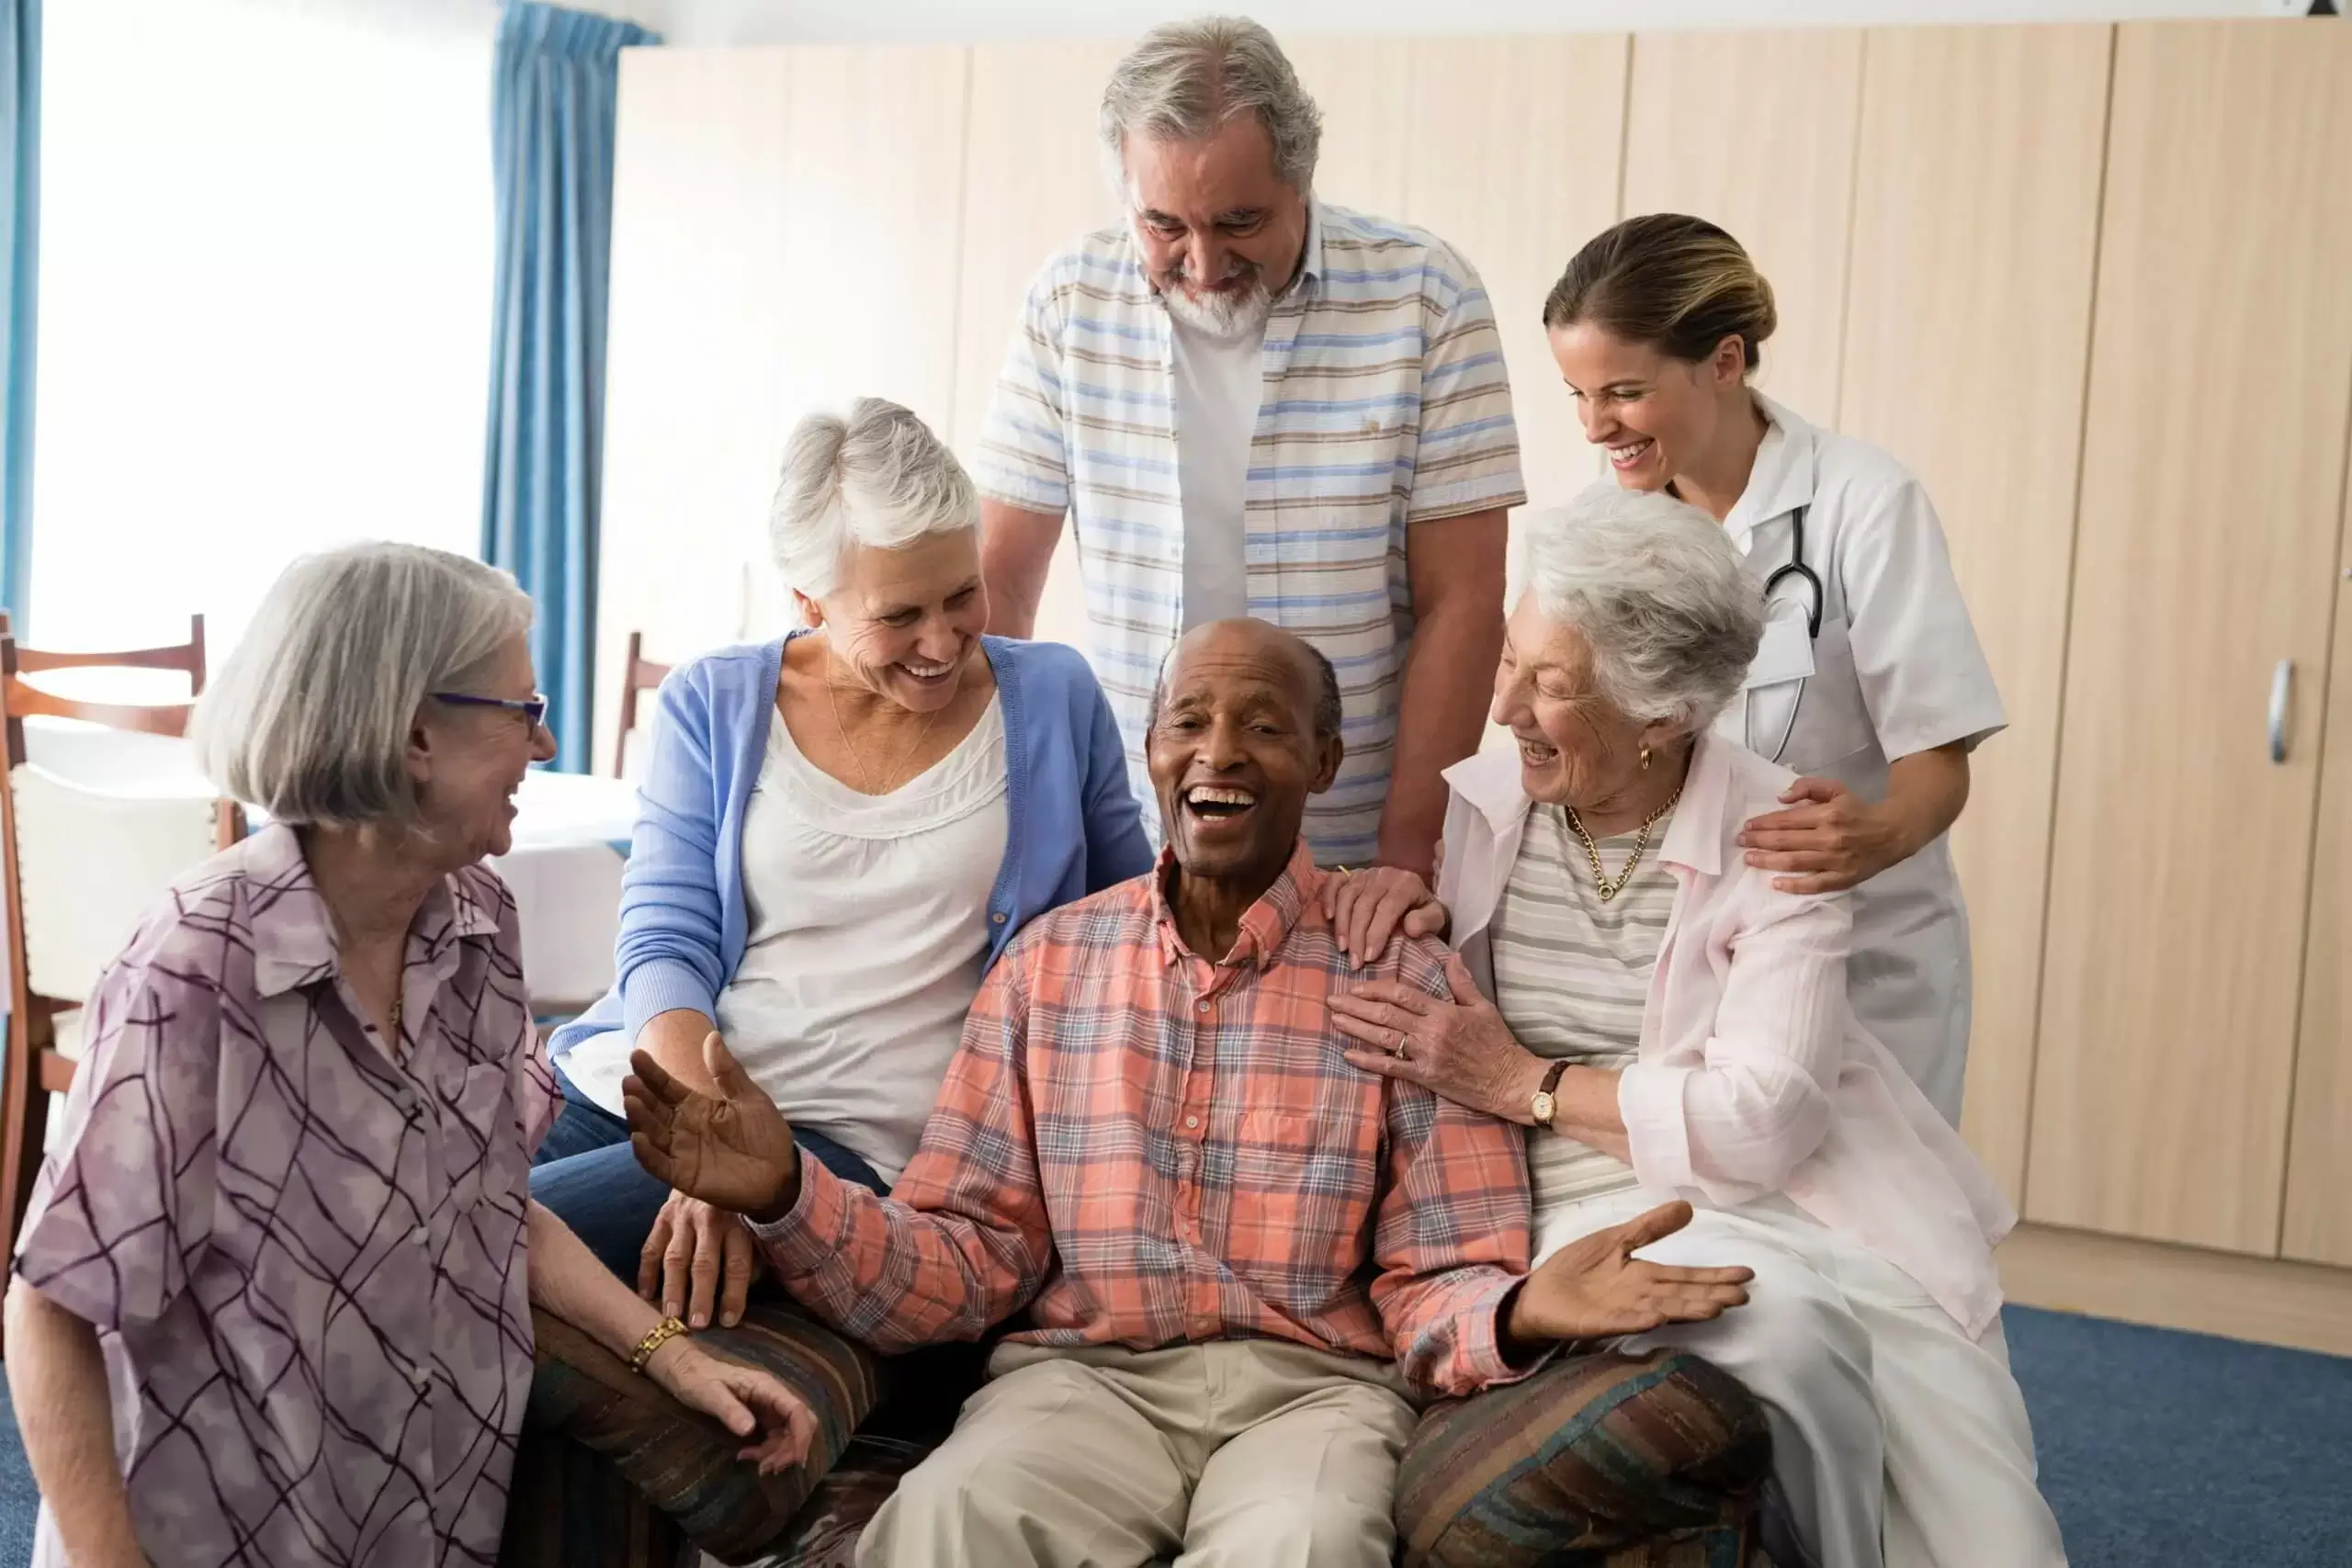 Senior citizens helps old man get out of bed to help doctor check his health